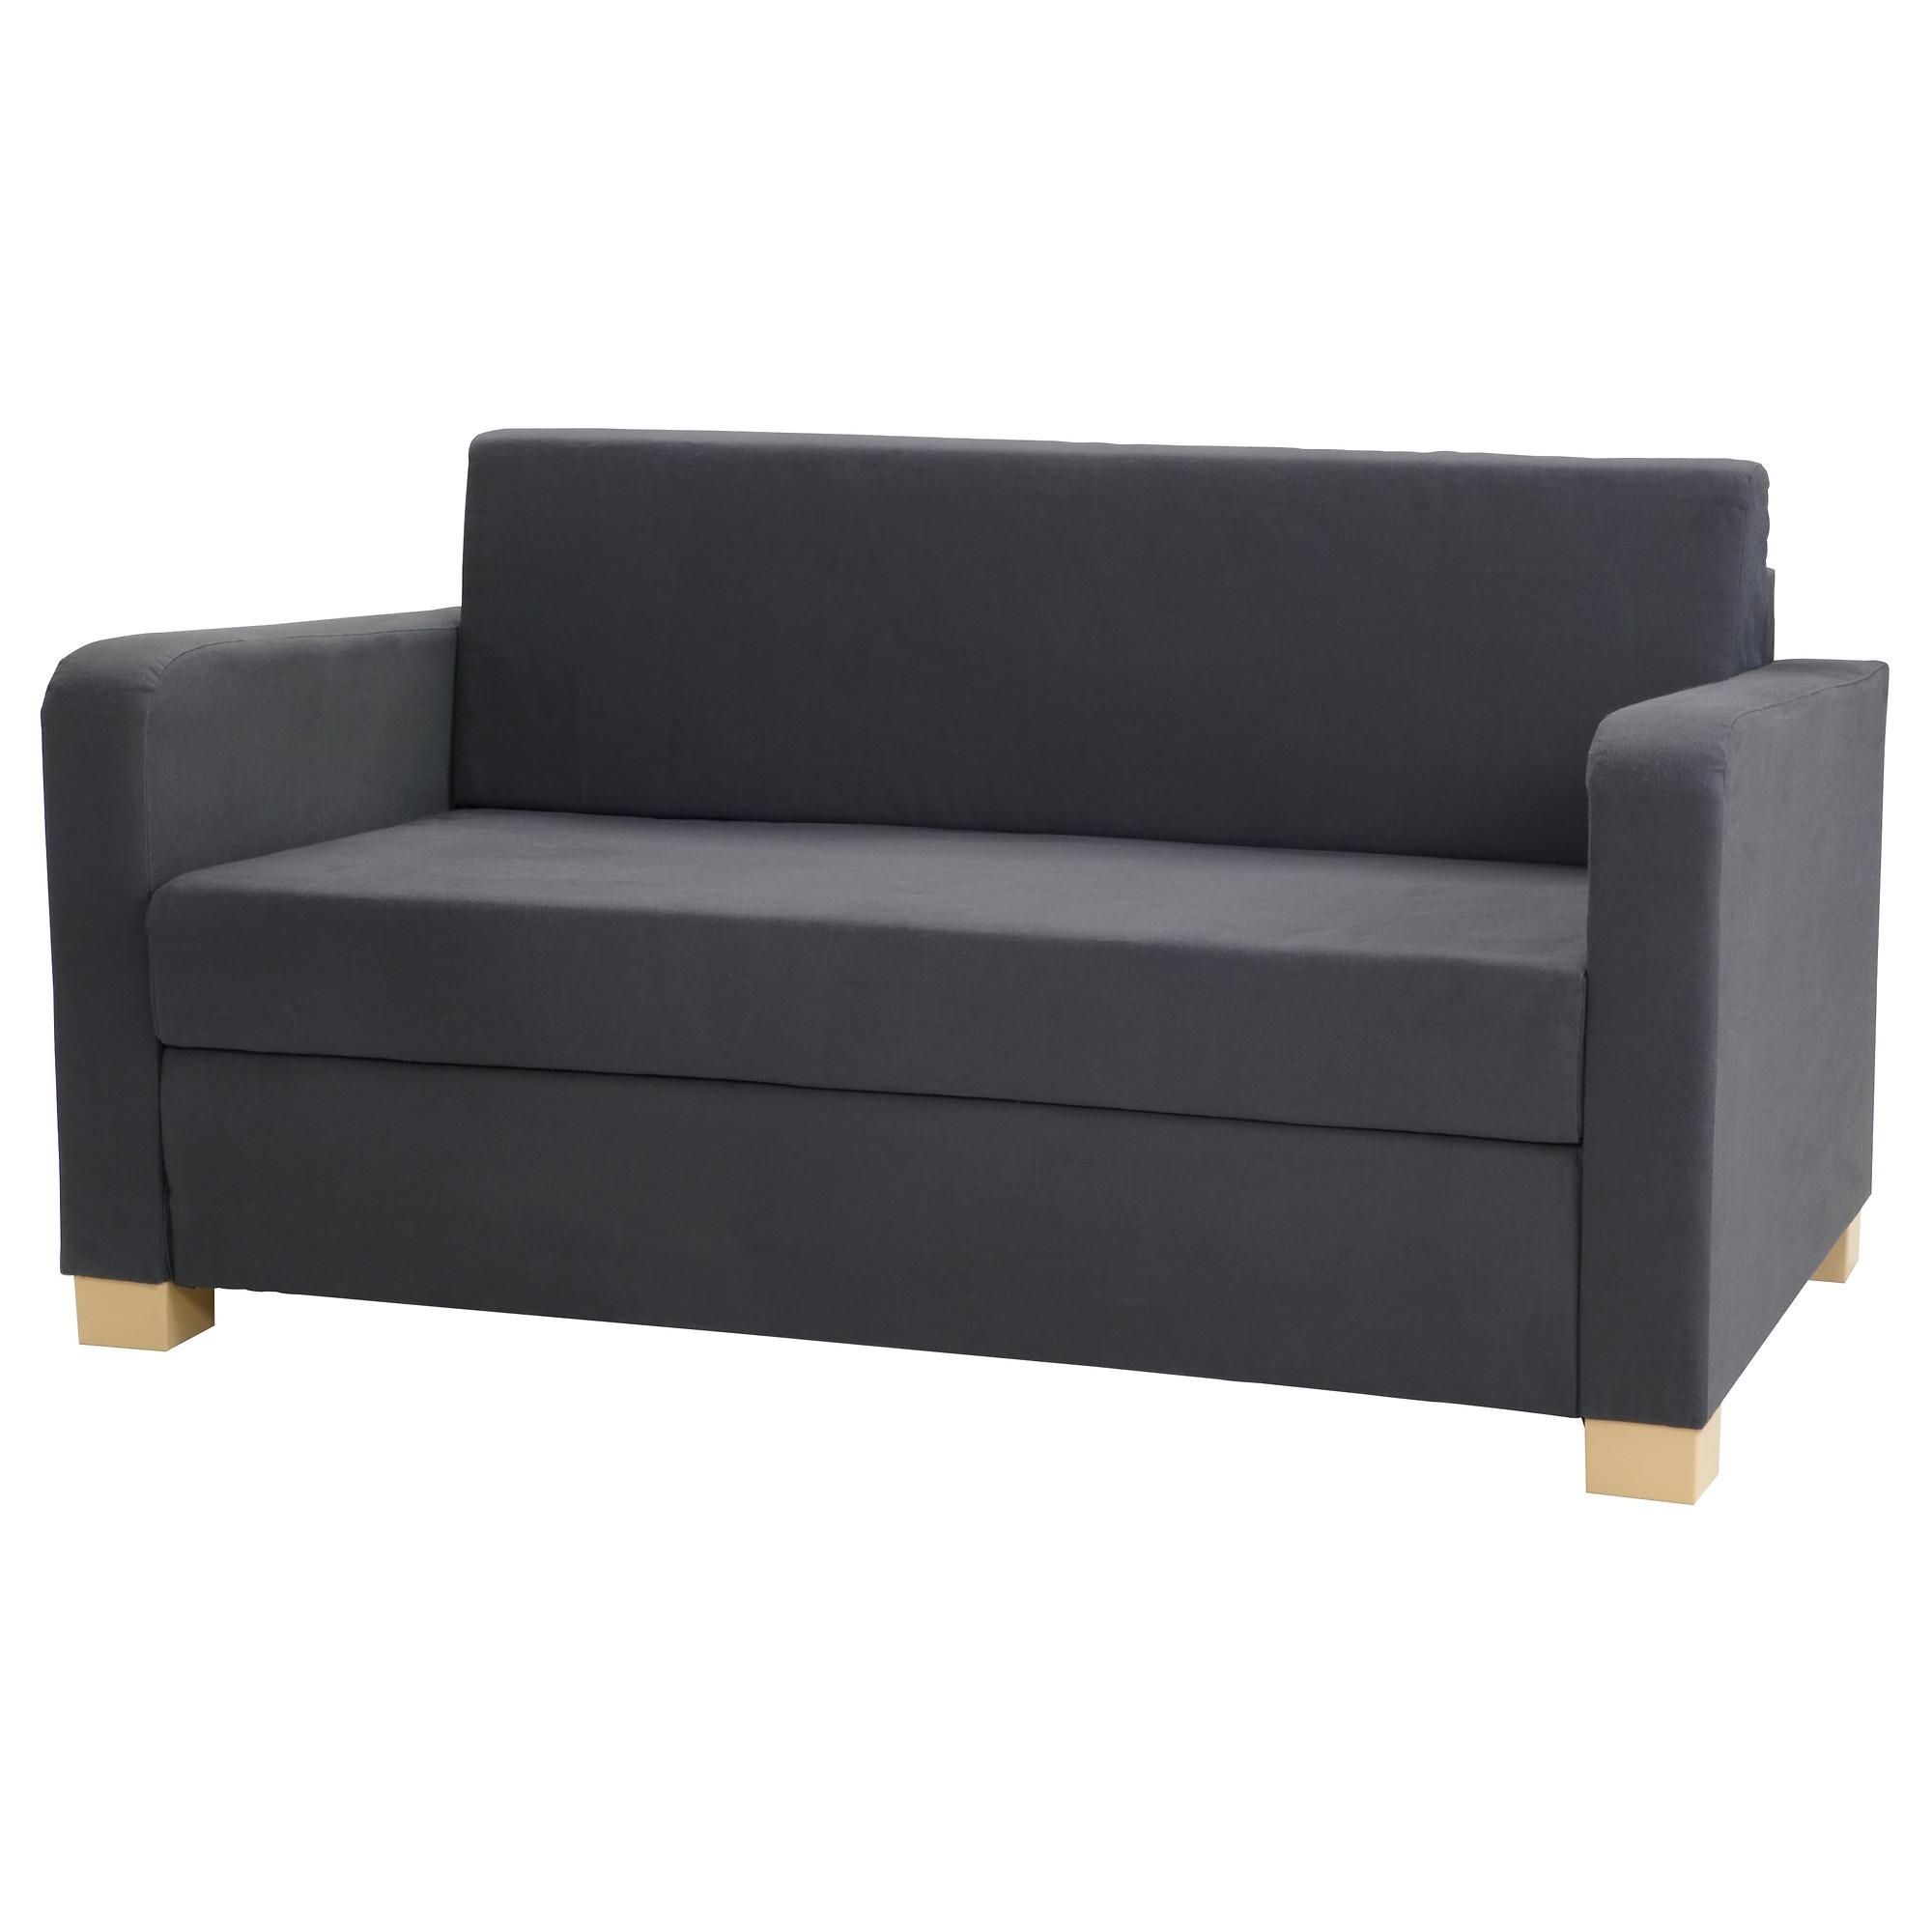 Furniture: Impressive Ikea Sofa Beds For Your Living Room — Mabas4 With Sofa Beds (View 1 of 20)